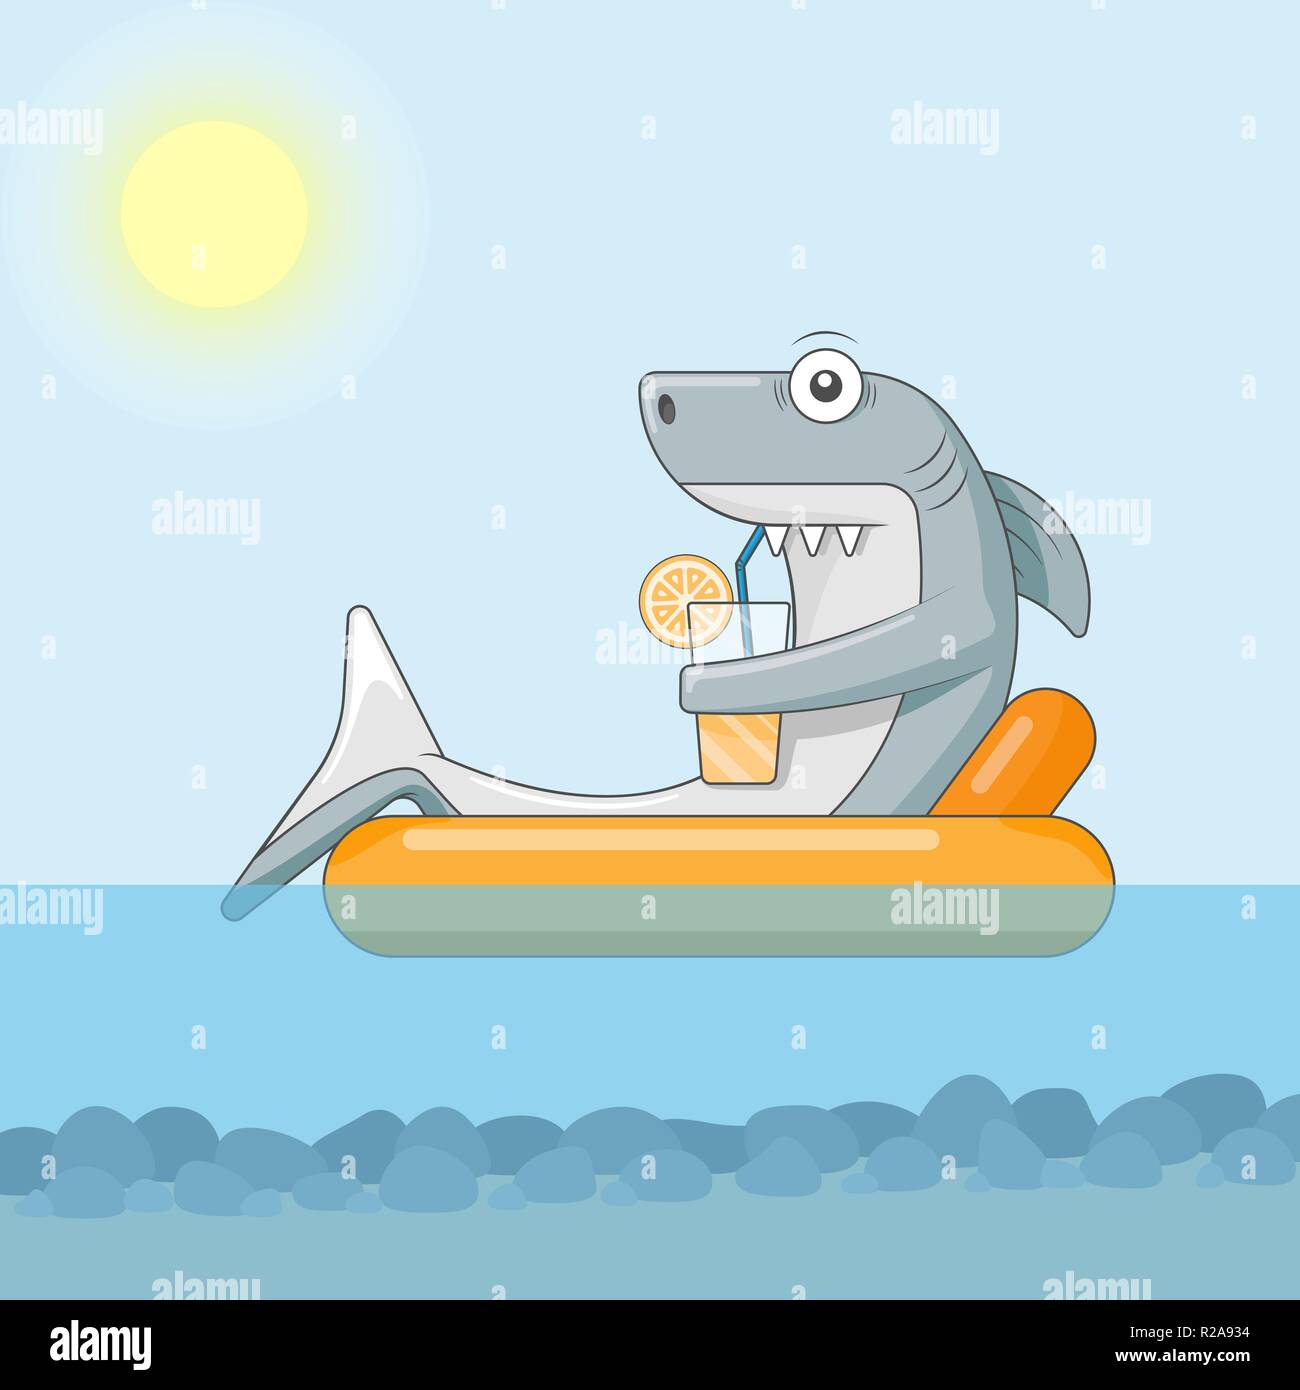 Shark drinks cocktail with a straw and floats on an air mattress in the sea. Weekends under the sun Stock Vector